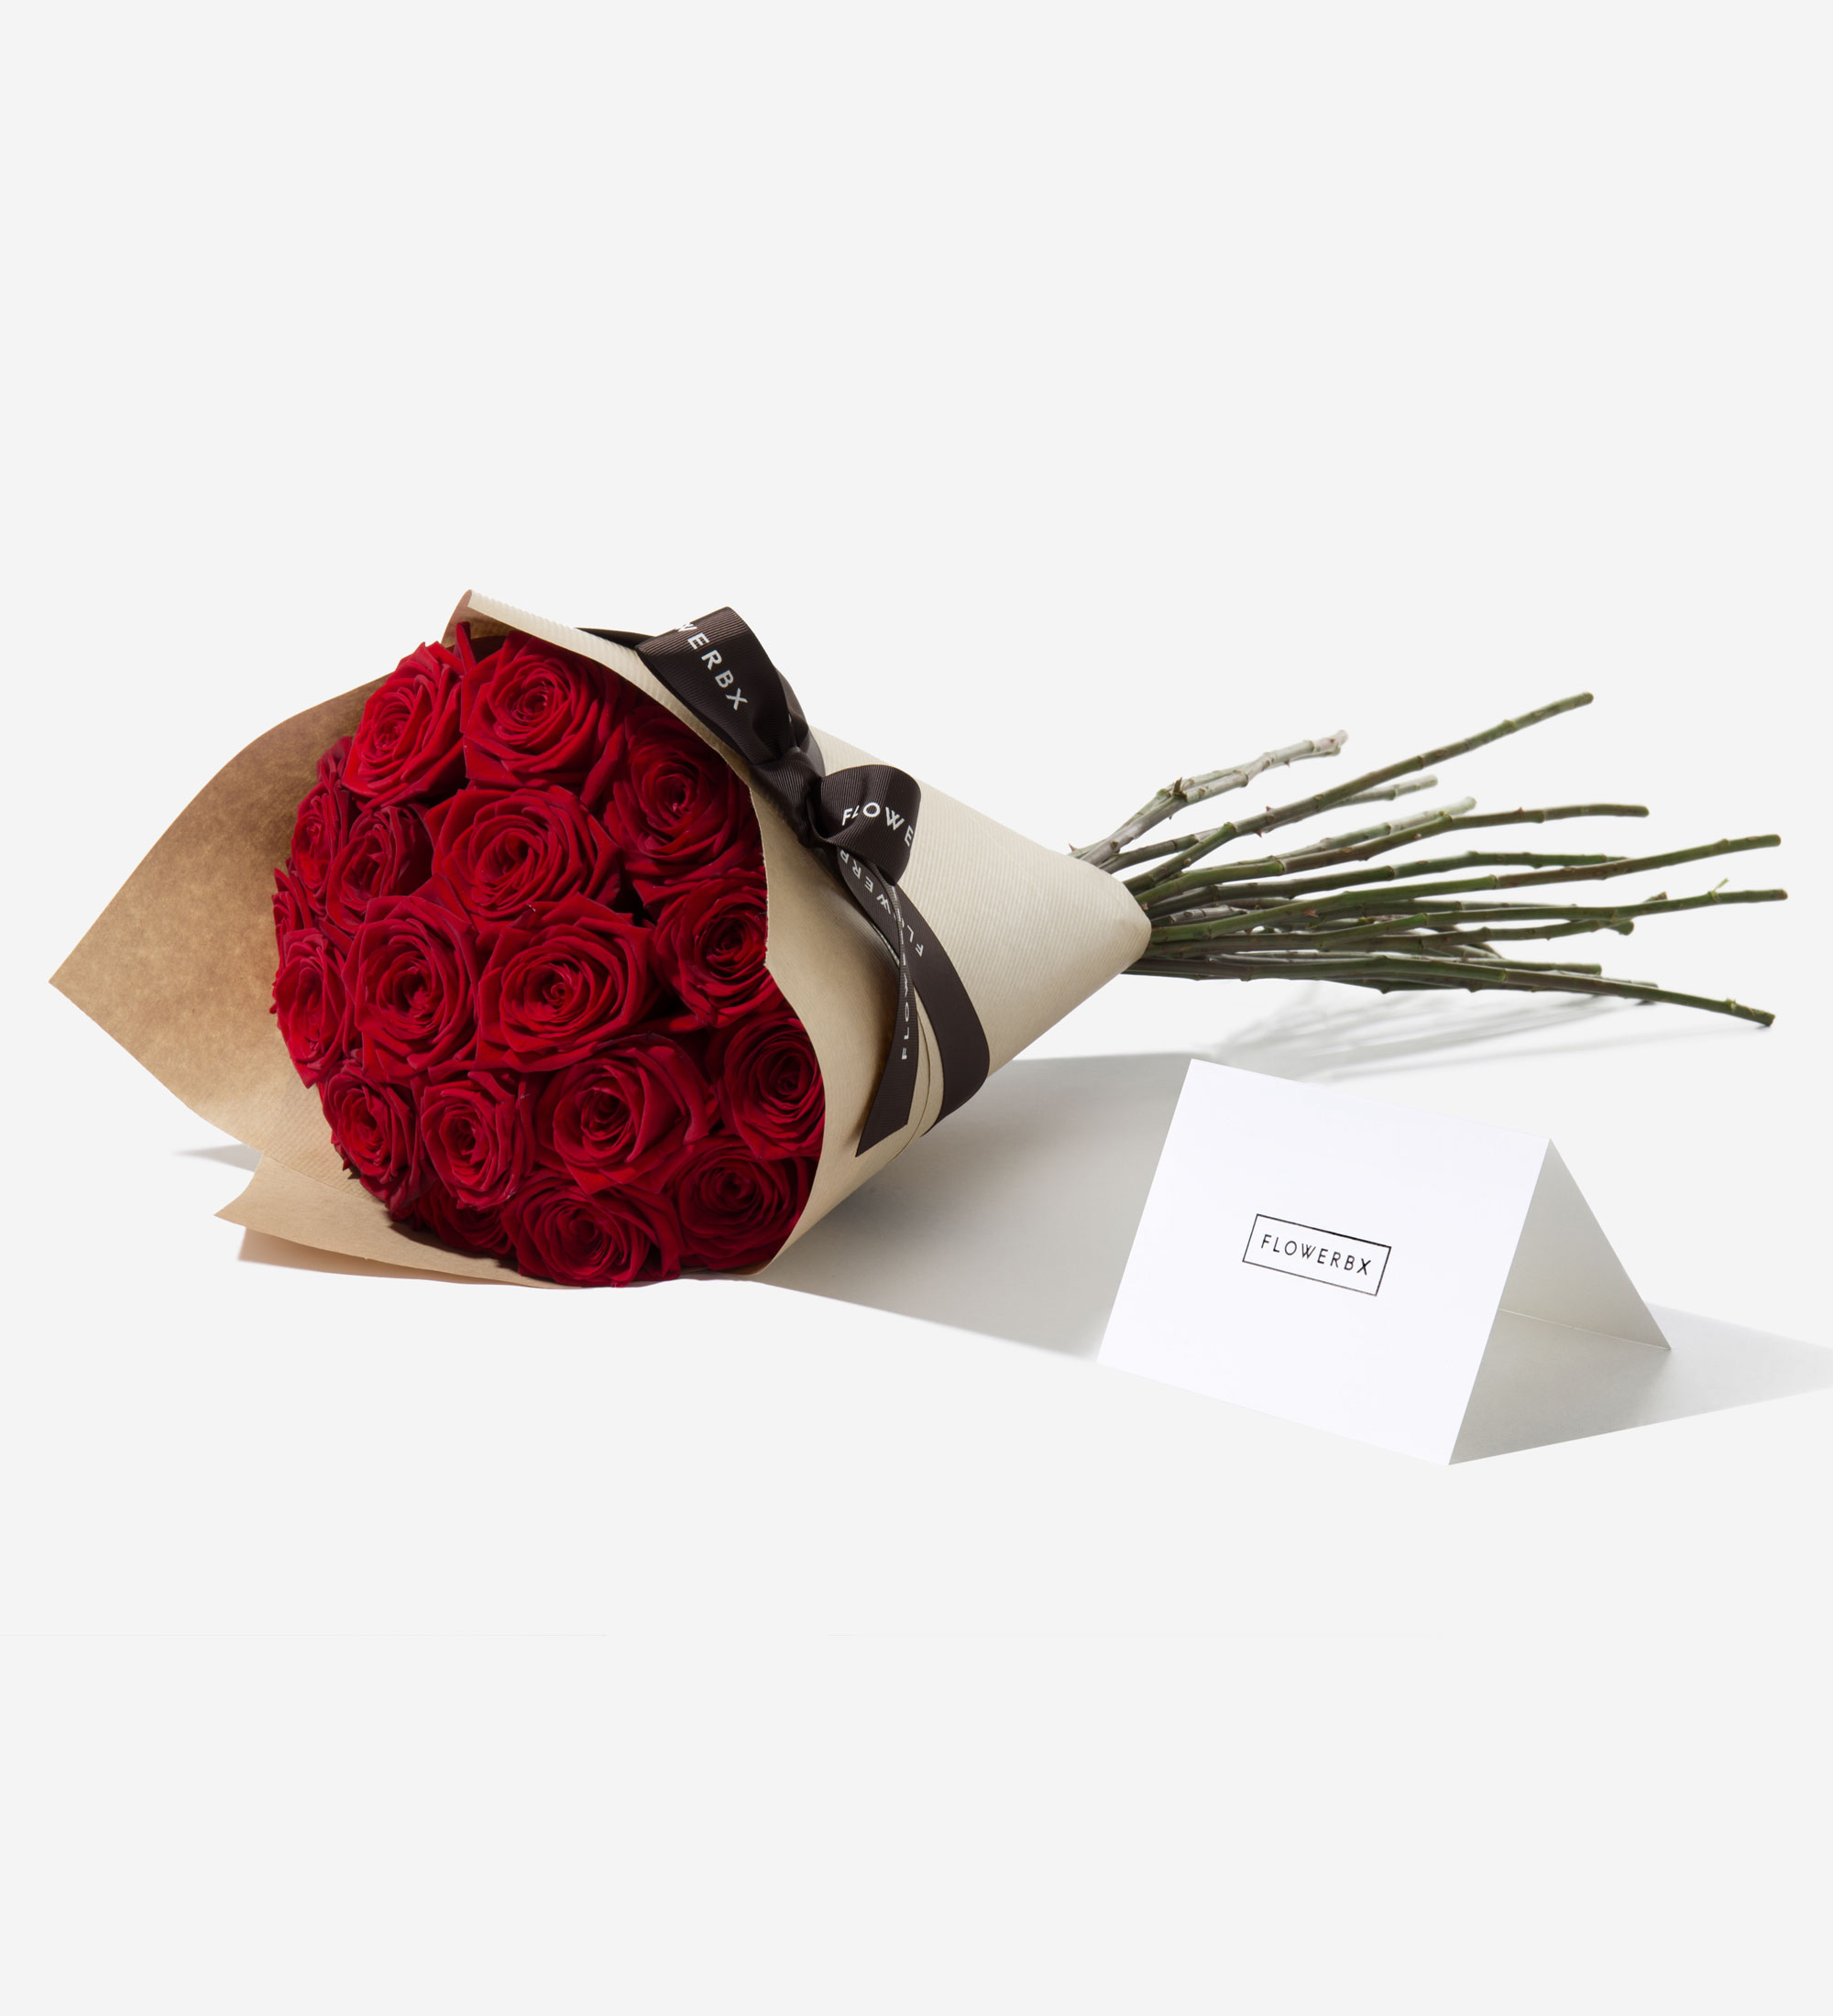 20 Red Roses, Red Naomi Rose Bouquet